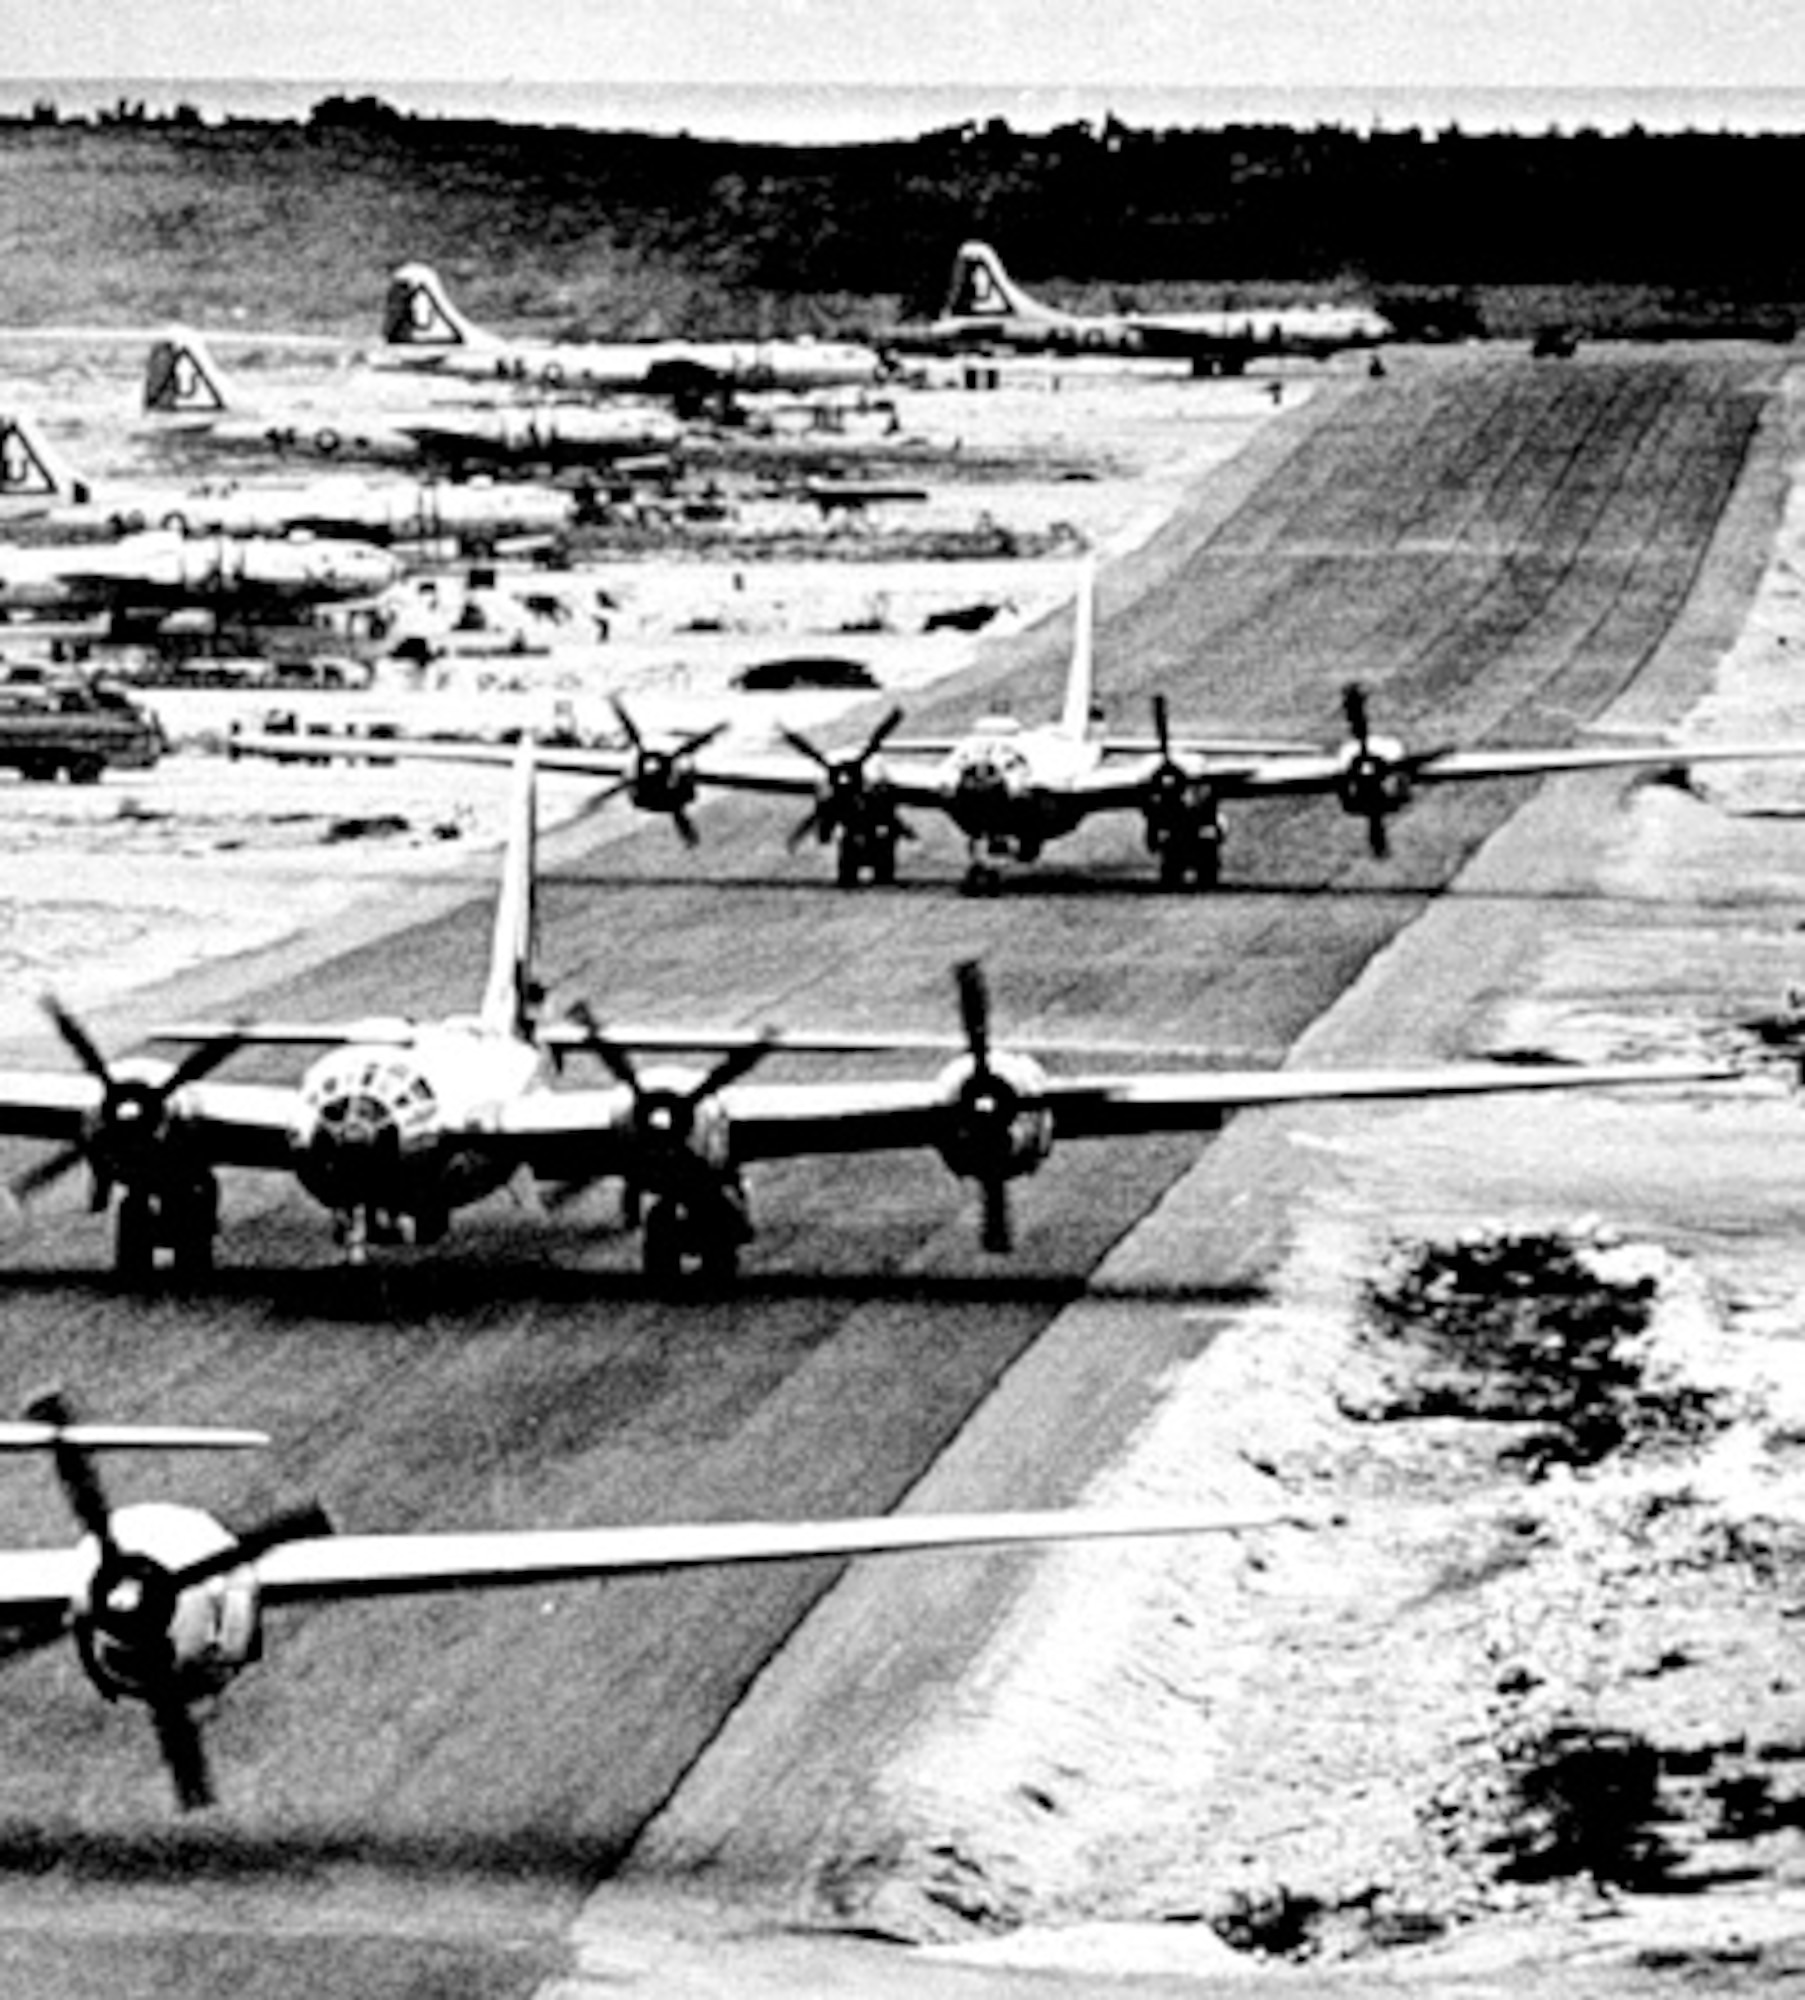 B-29s assigned to the Twentieth Air Force lined up on a Tinian runway. (Courtesy photo)